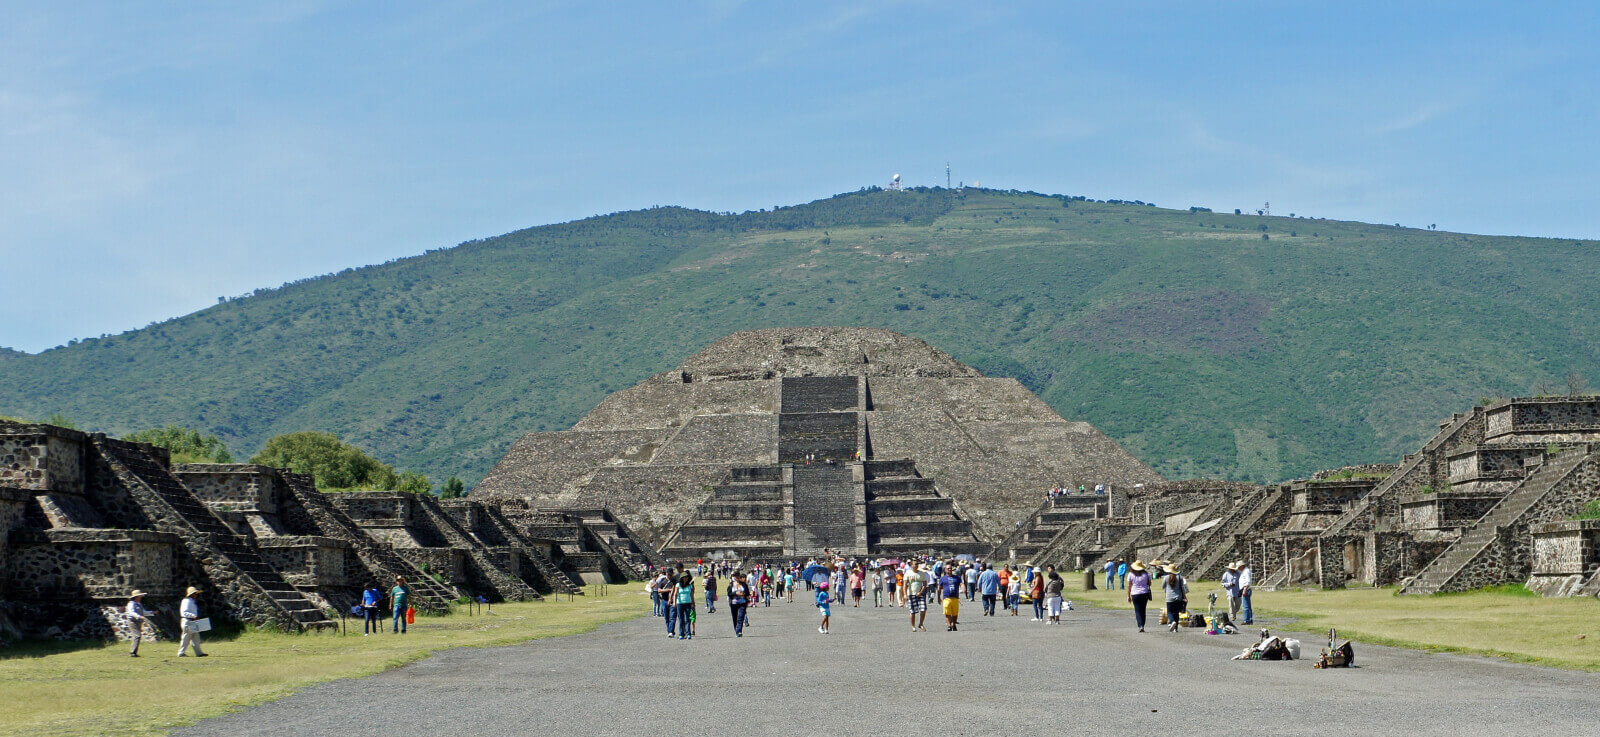 Panoramic photo of the pyramid of the moon in Teotihuacan.